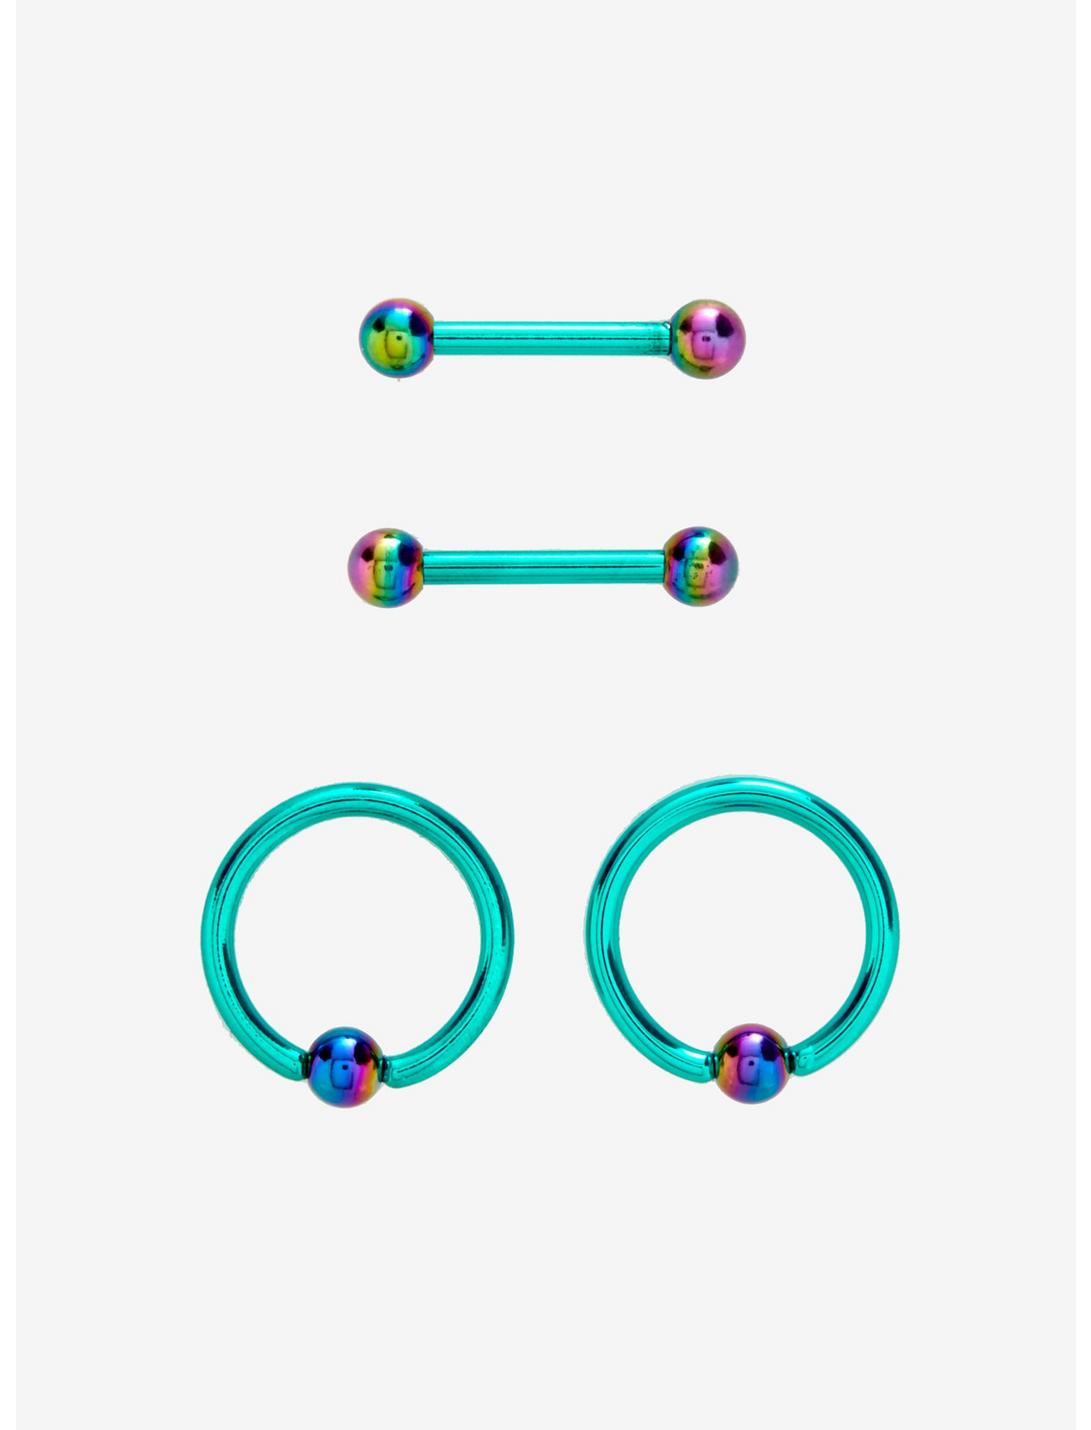 14G Anodized Green & Purple Steel Nipple Barbell 4 Pack, , hi-res